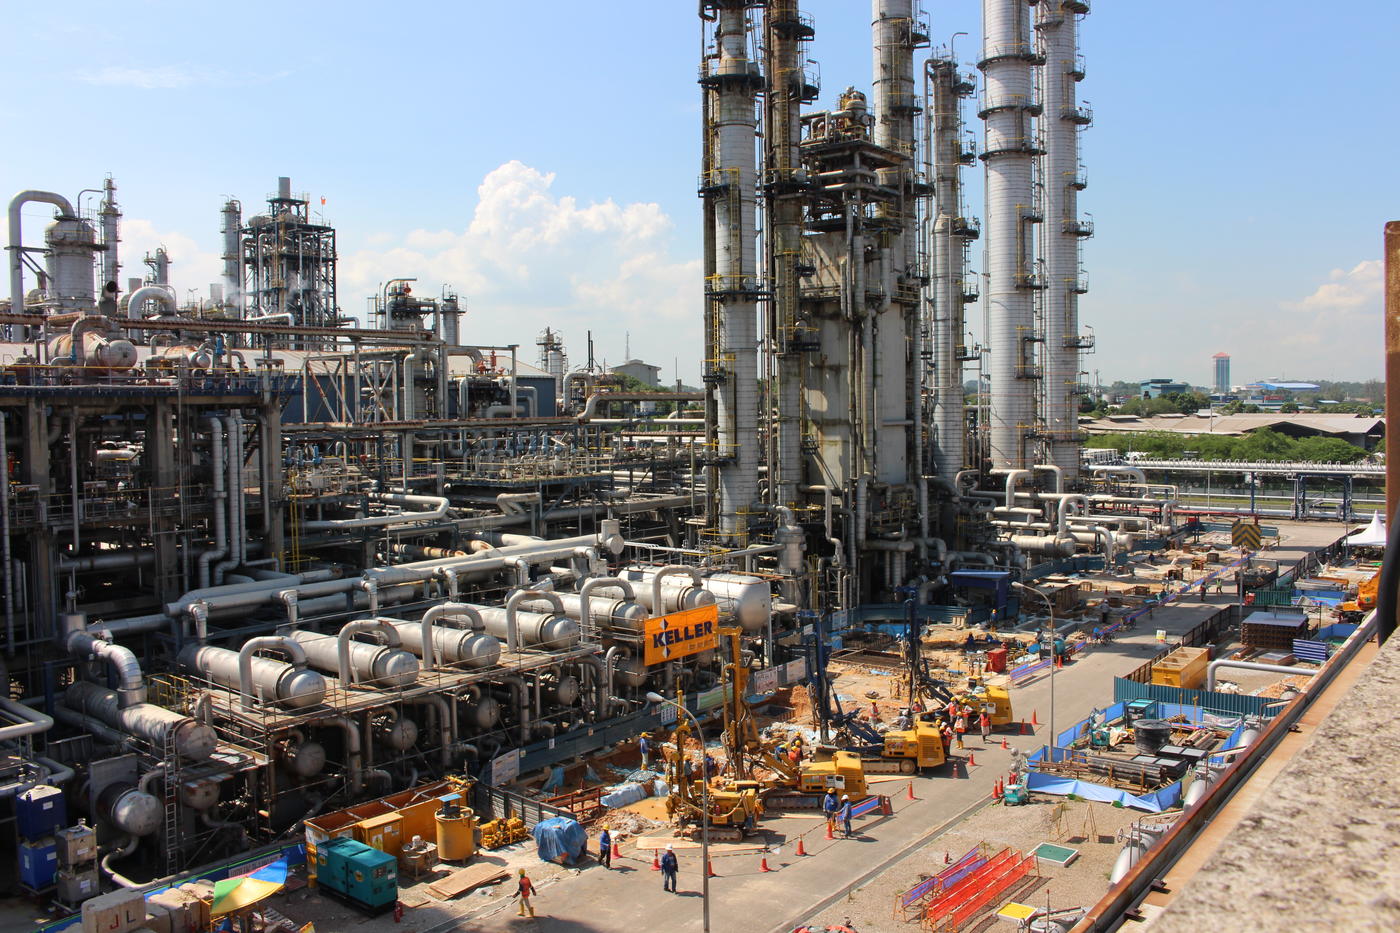 Keller oil gas and chemical project for Lotte